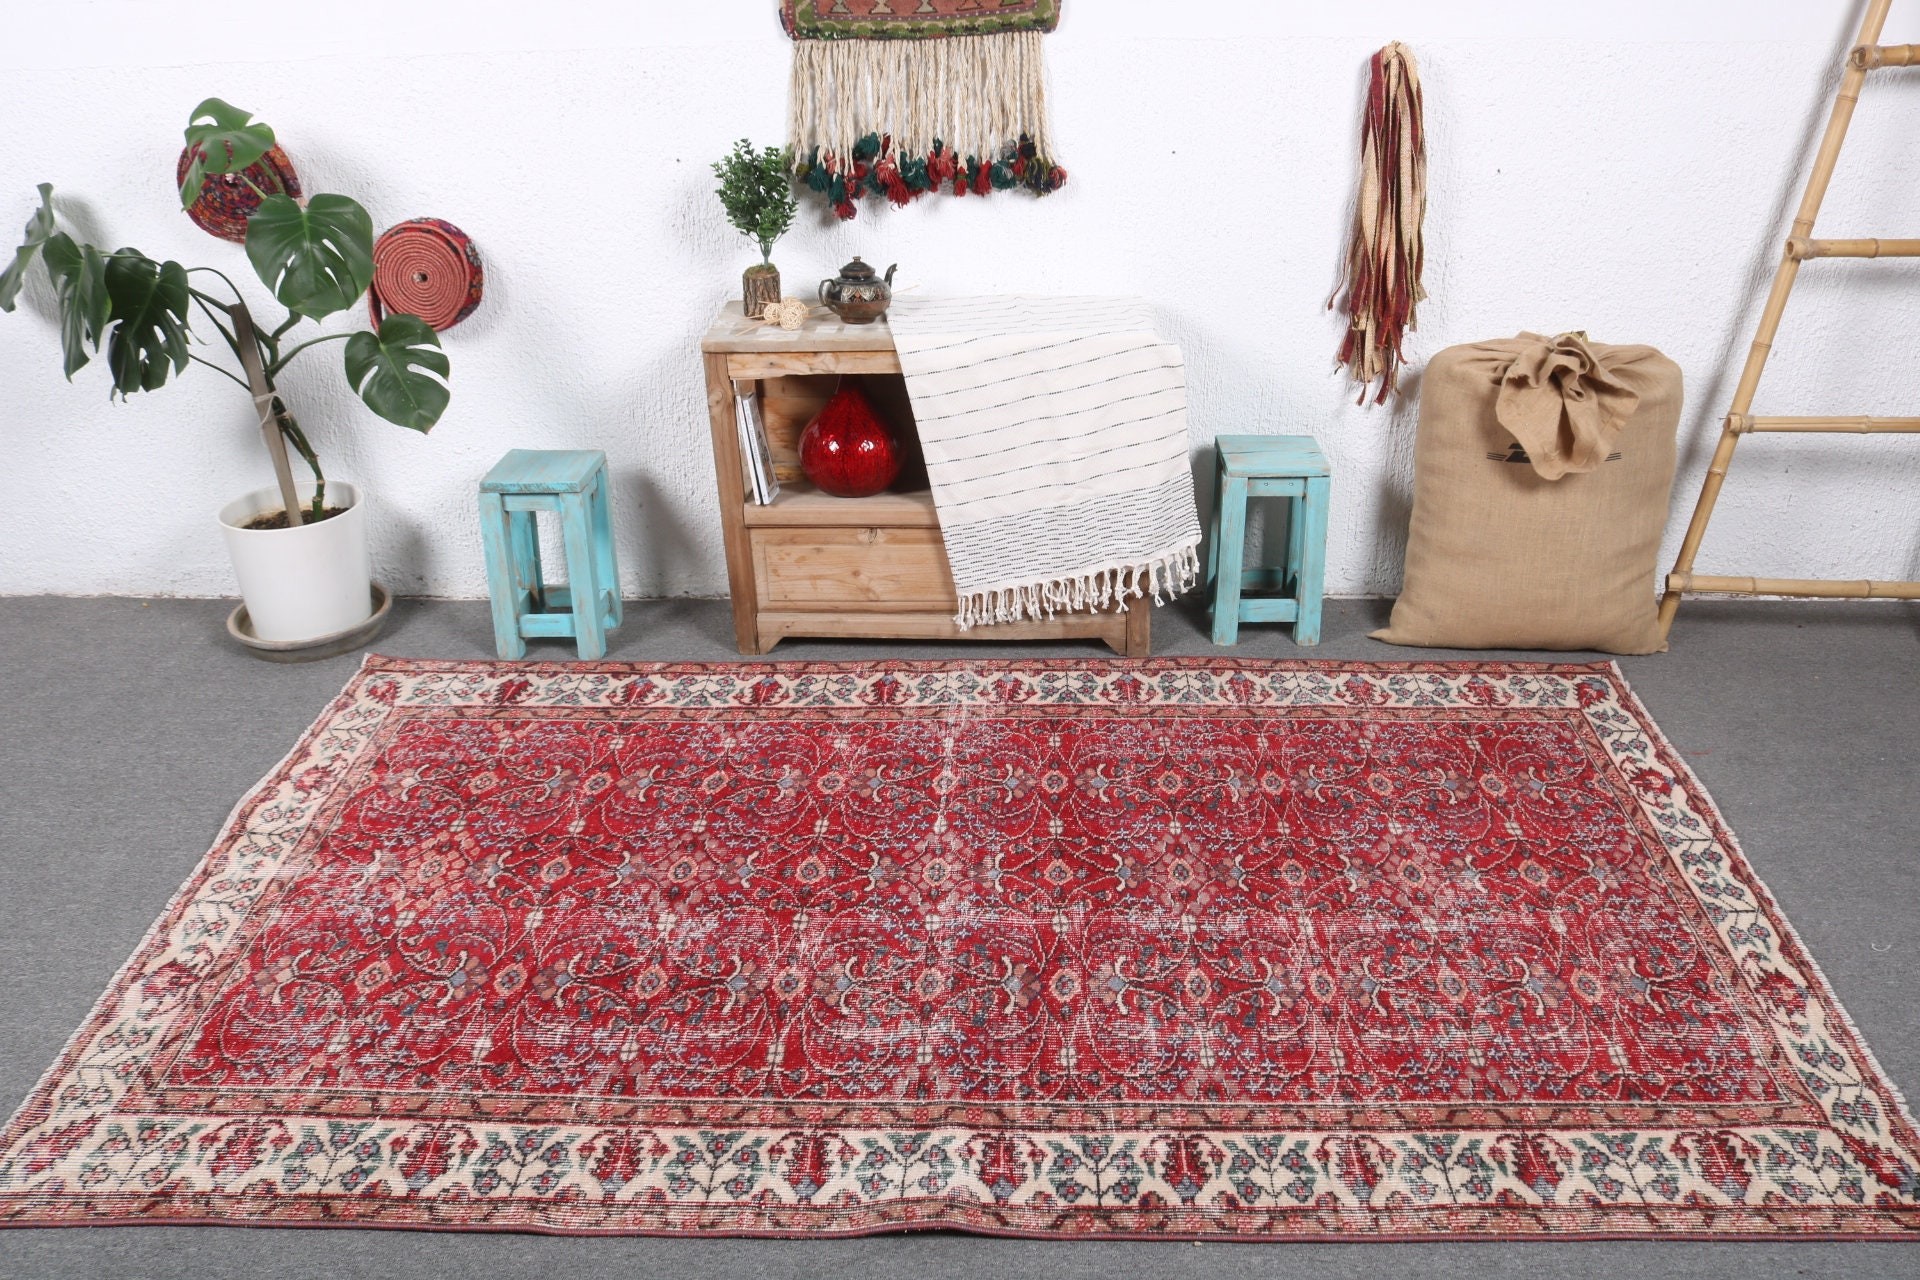 Kitchen Rugs, 4.7x7.8 ft Area Rugs, Living Room Rug, Red Antique Rug, Vintage Rug, Turkish Rug, Oushak Rugs, Authentic Rug, Dining Room Rug